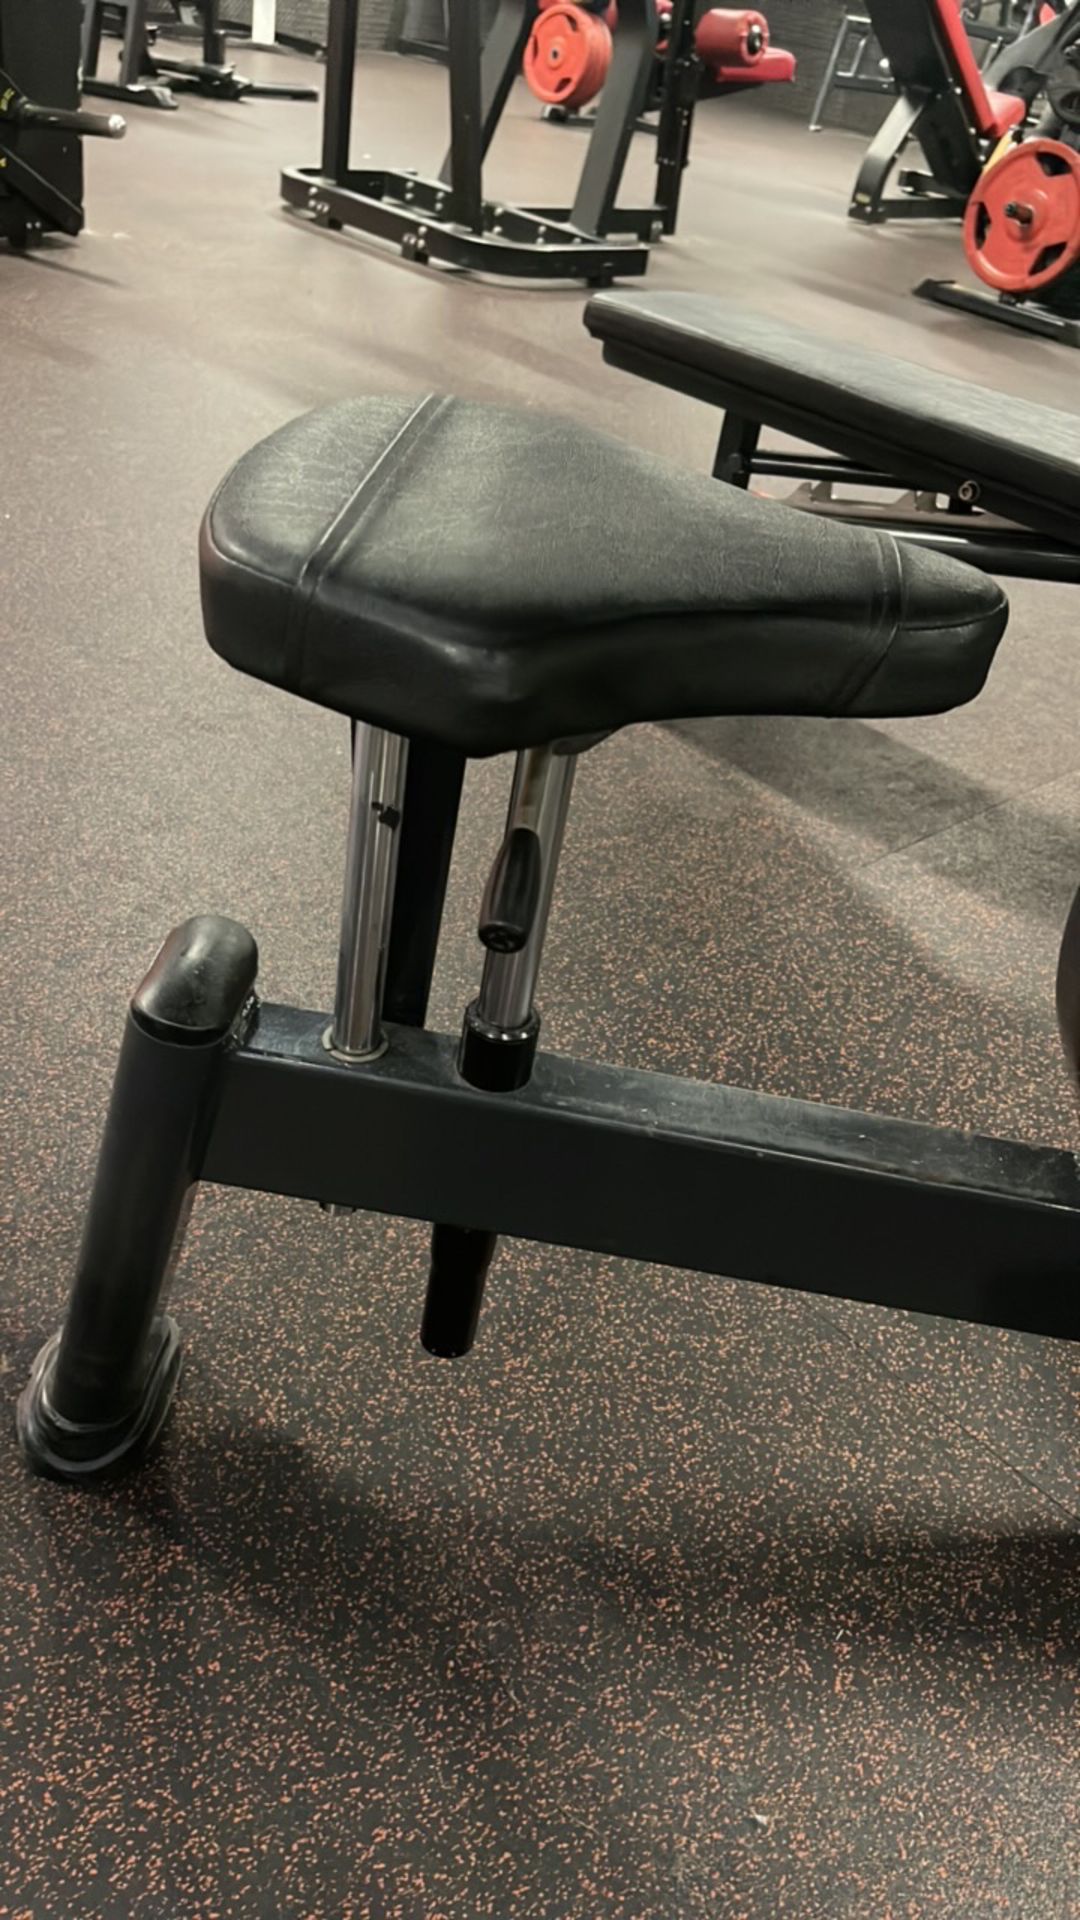 Preacher Curl Station - Image 4 of 5